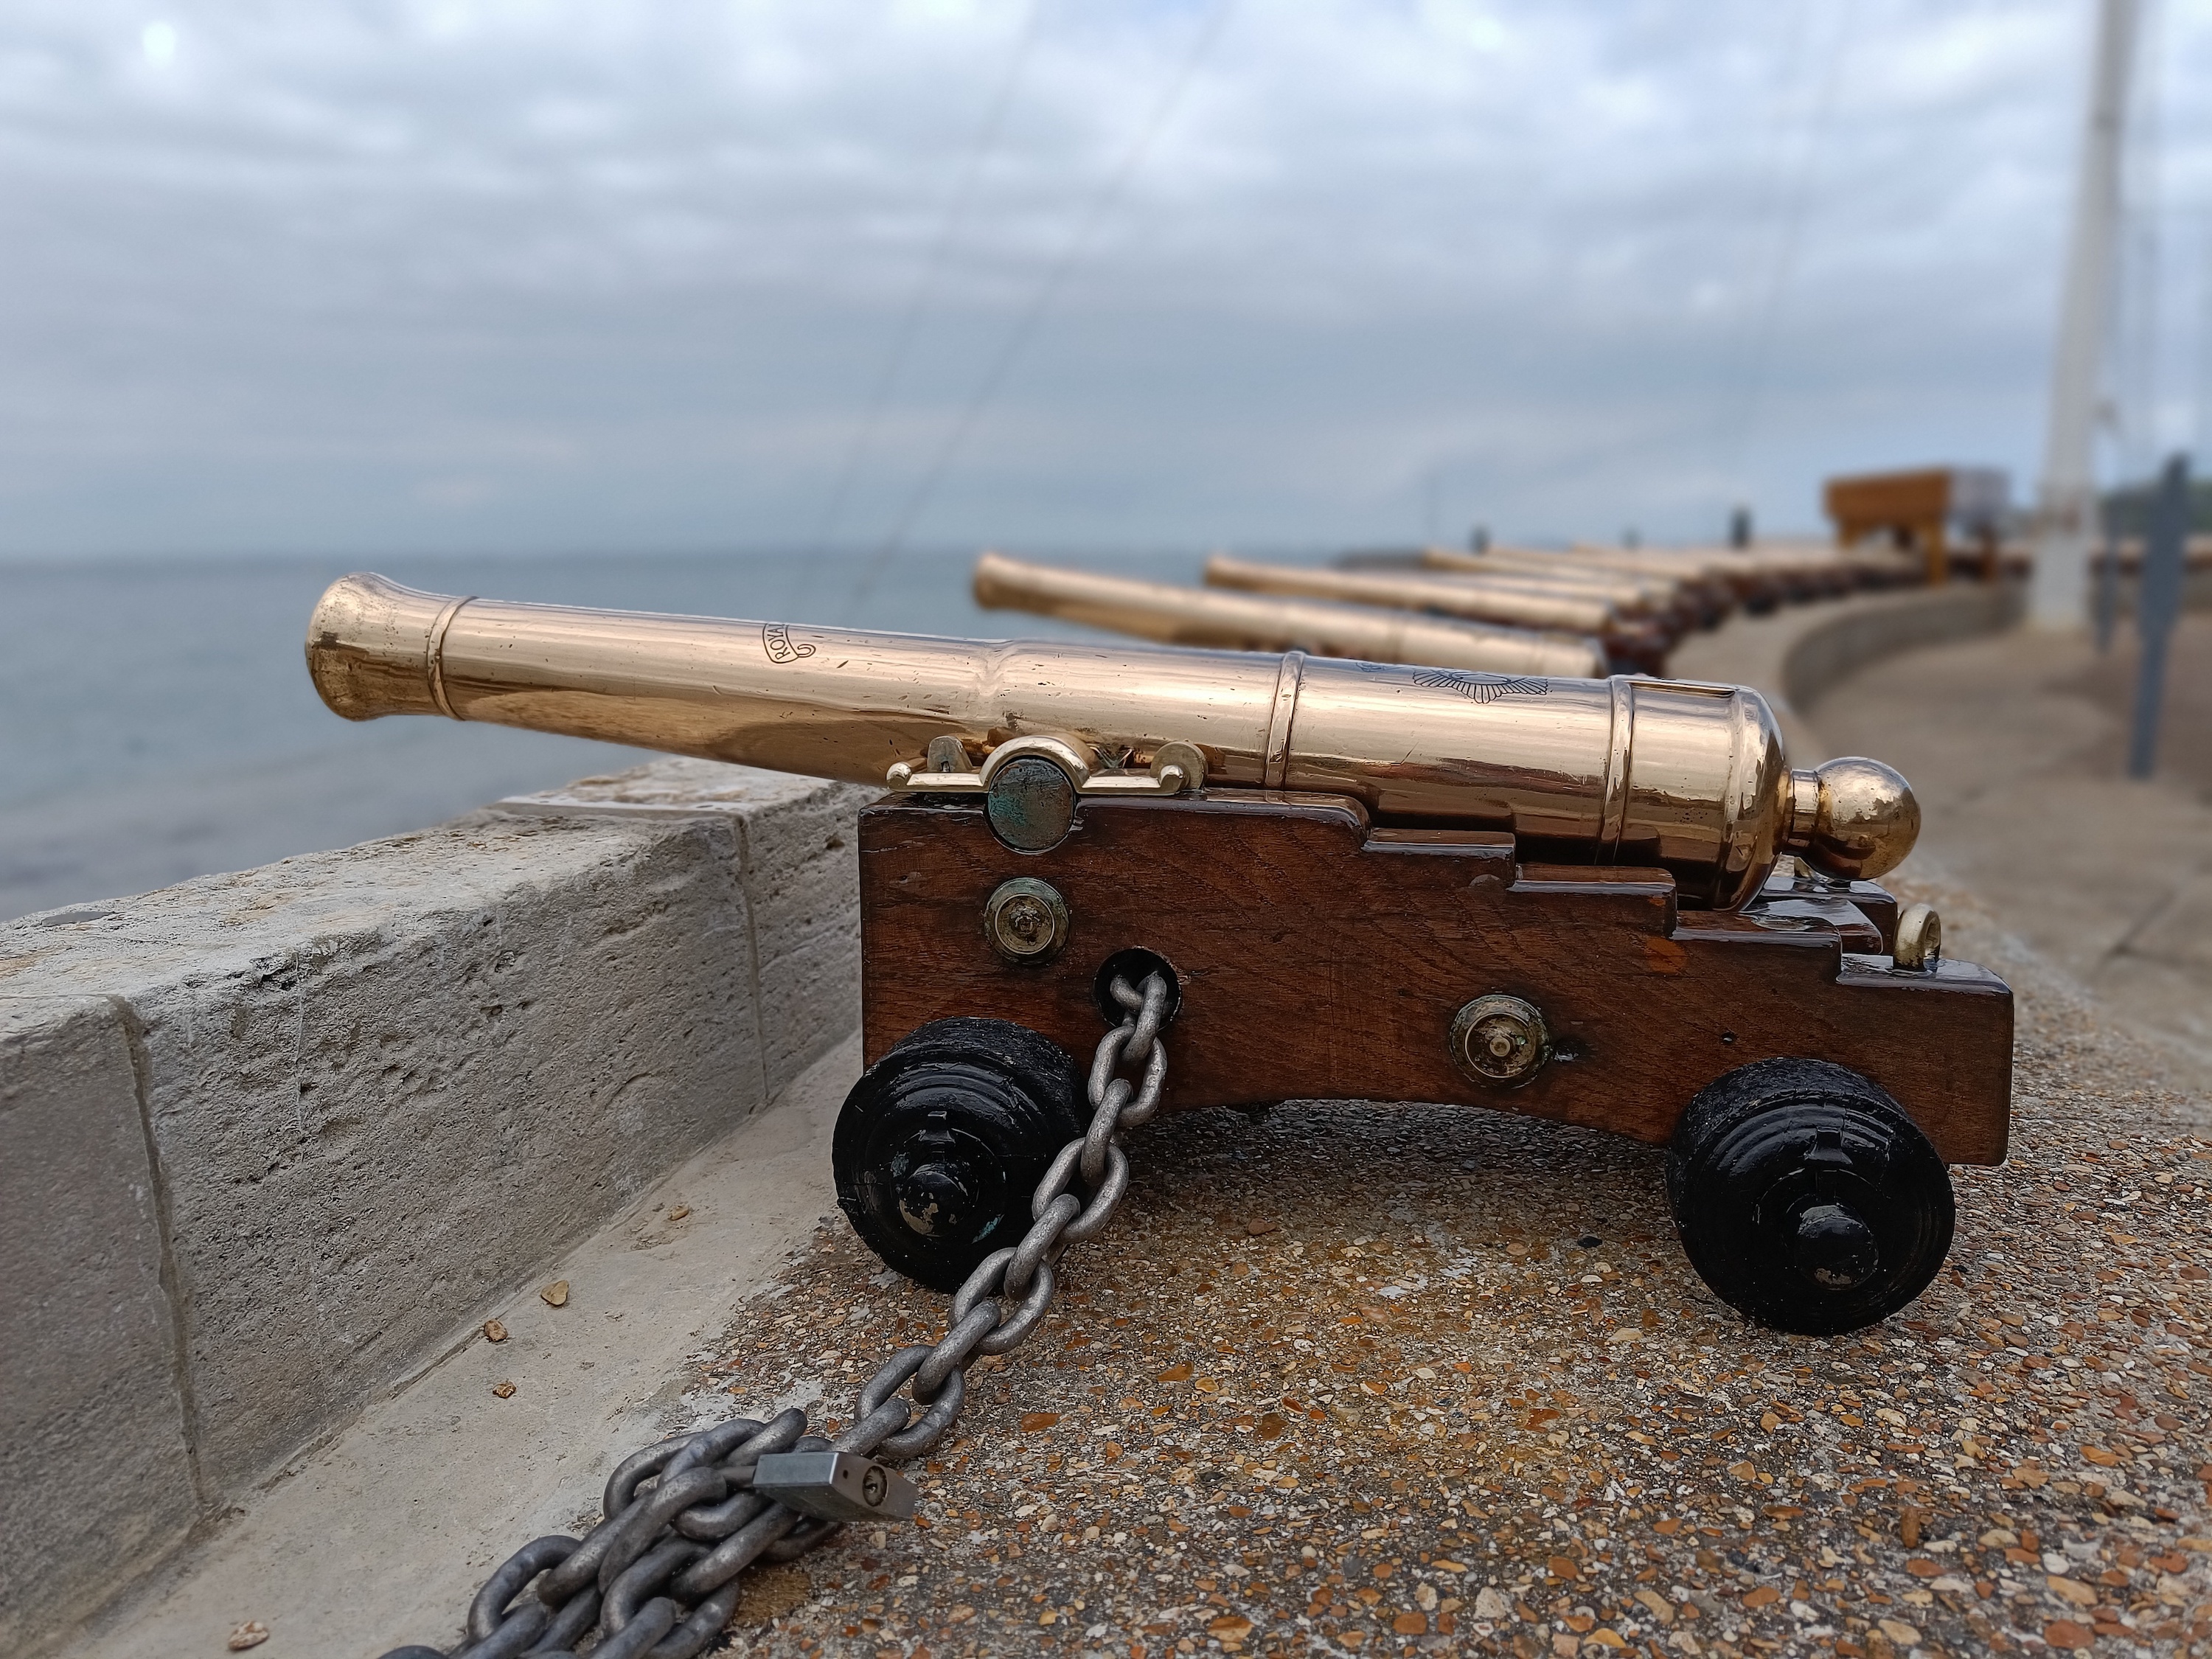 OnePlus Nord 2T Portrait mode photo of a cannon.